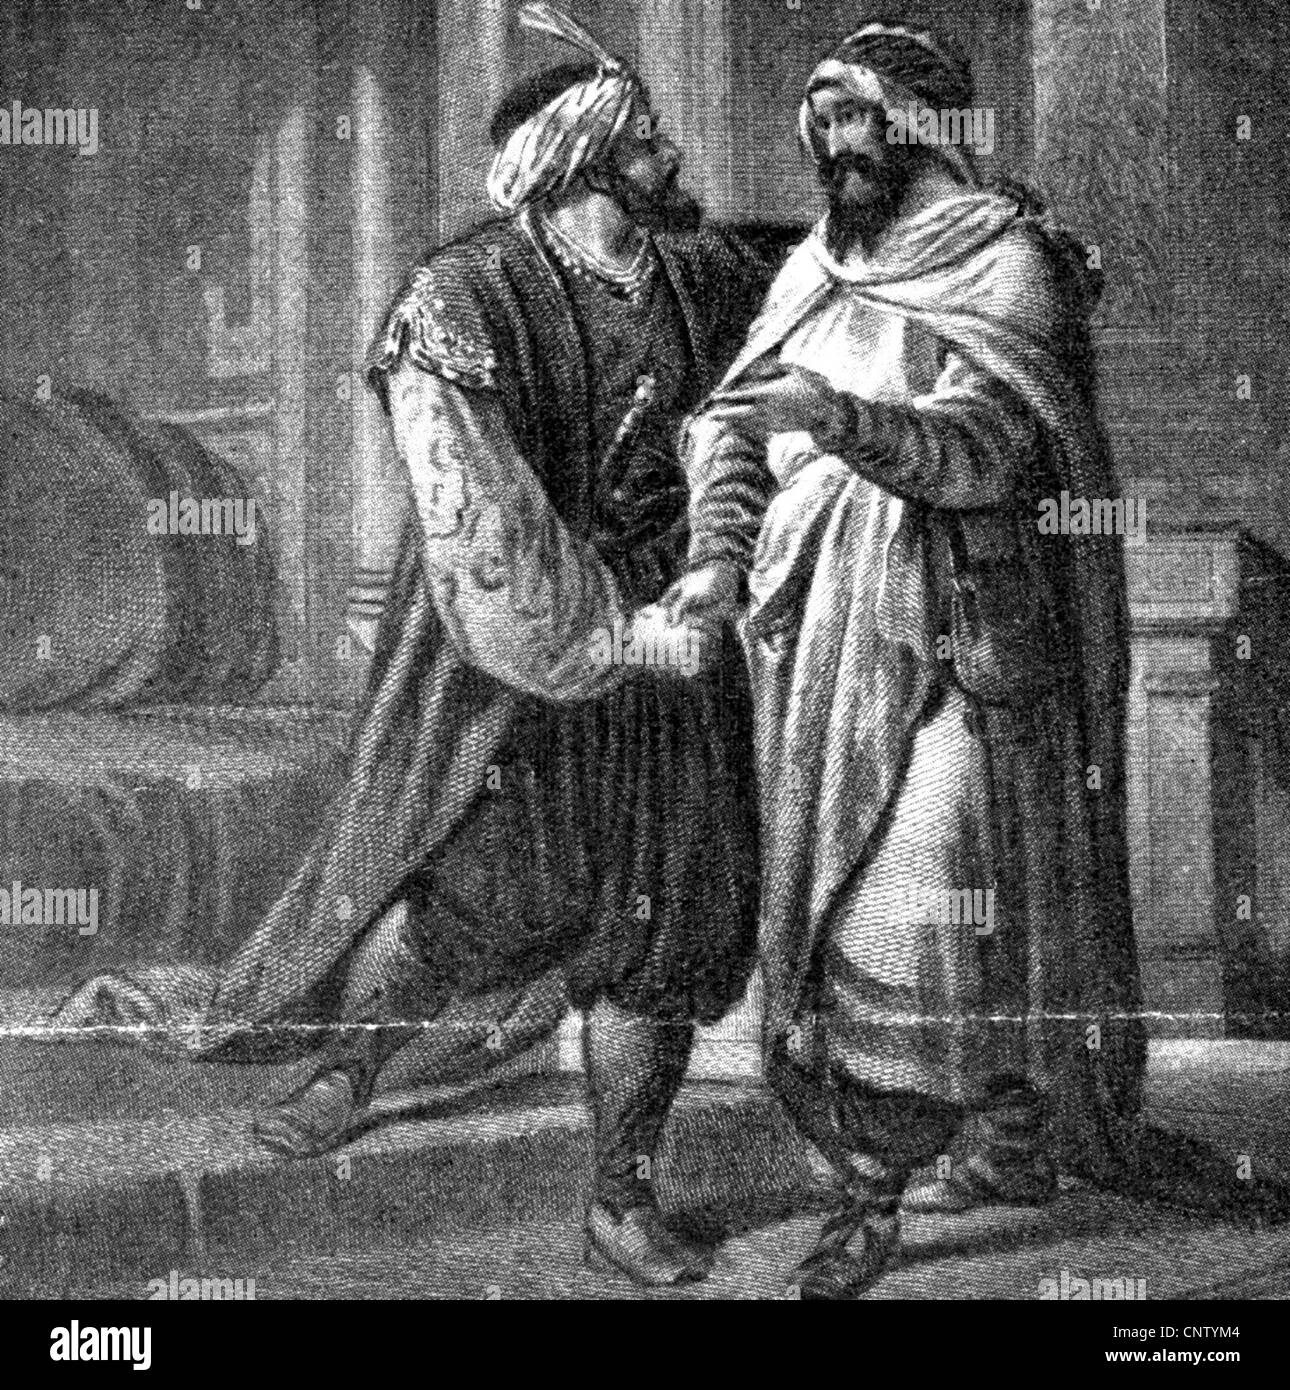 theatre / theater, stage play, 'Nathan the Wise', by G. E. Lessing, steel engraving by F. Rothbart, circa 19th century, , Additional-Rights-Clearences-Not Available Stock Photo